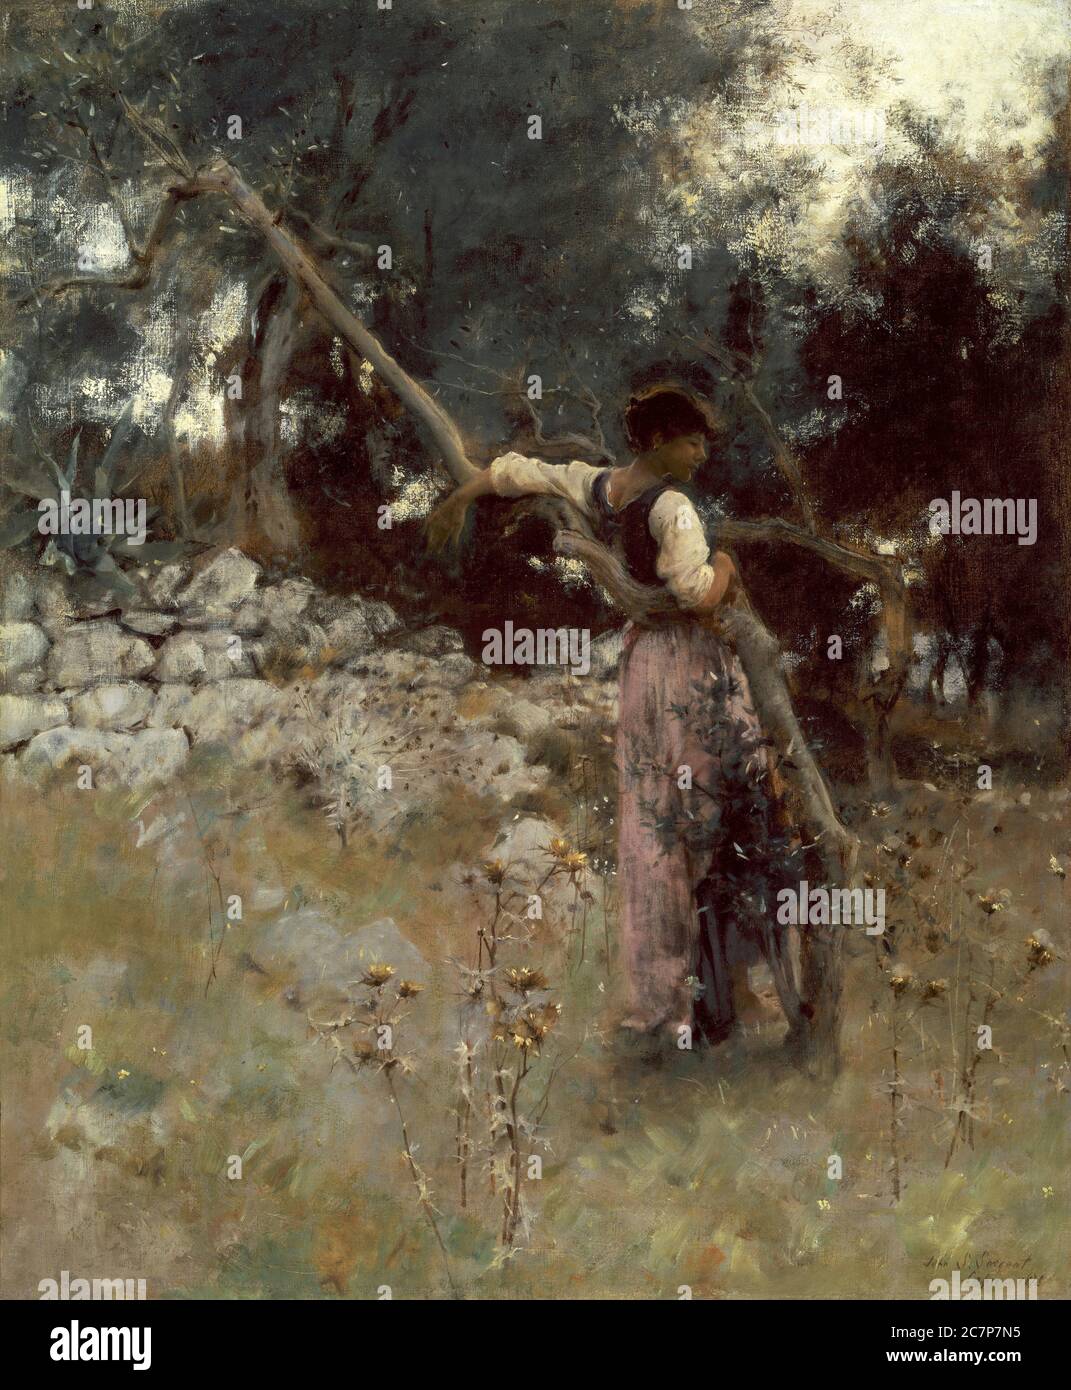 Artwork from the famous painter John Singer Sargent. Stock Photo